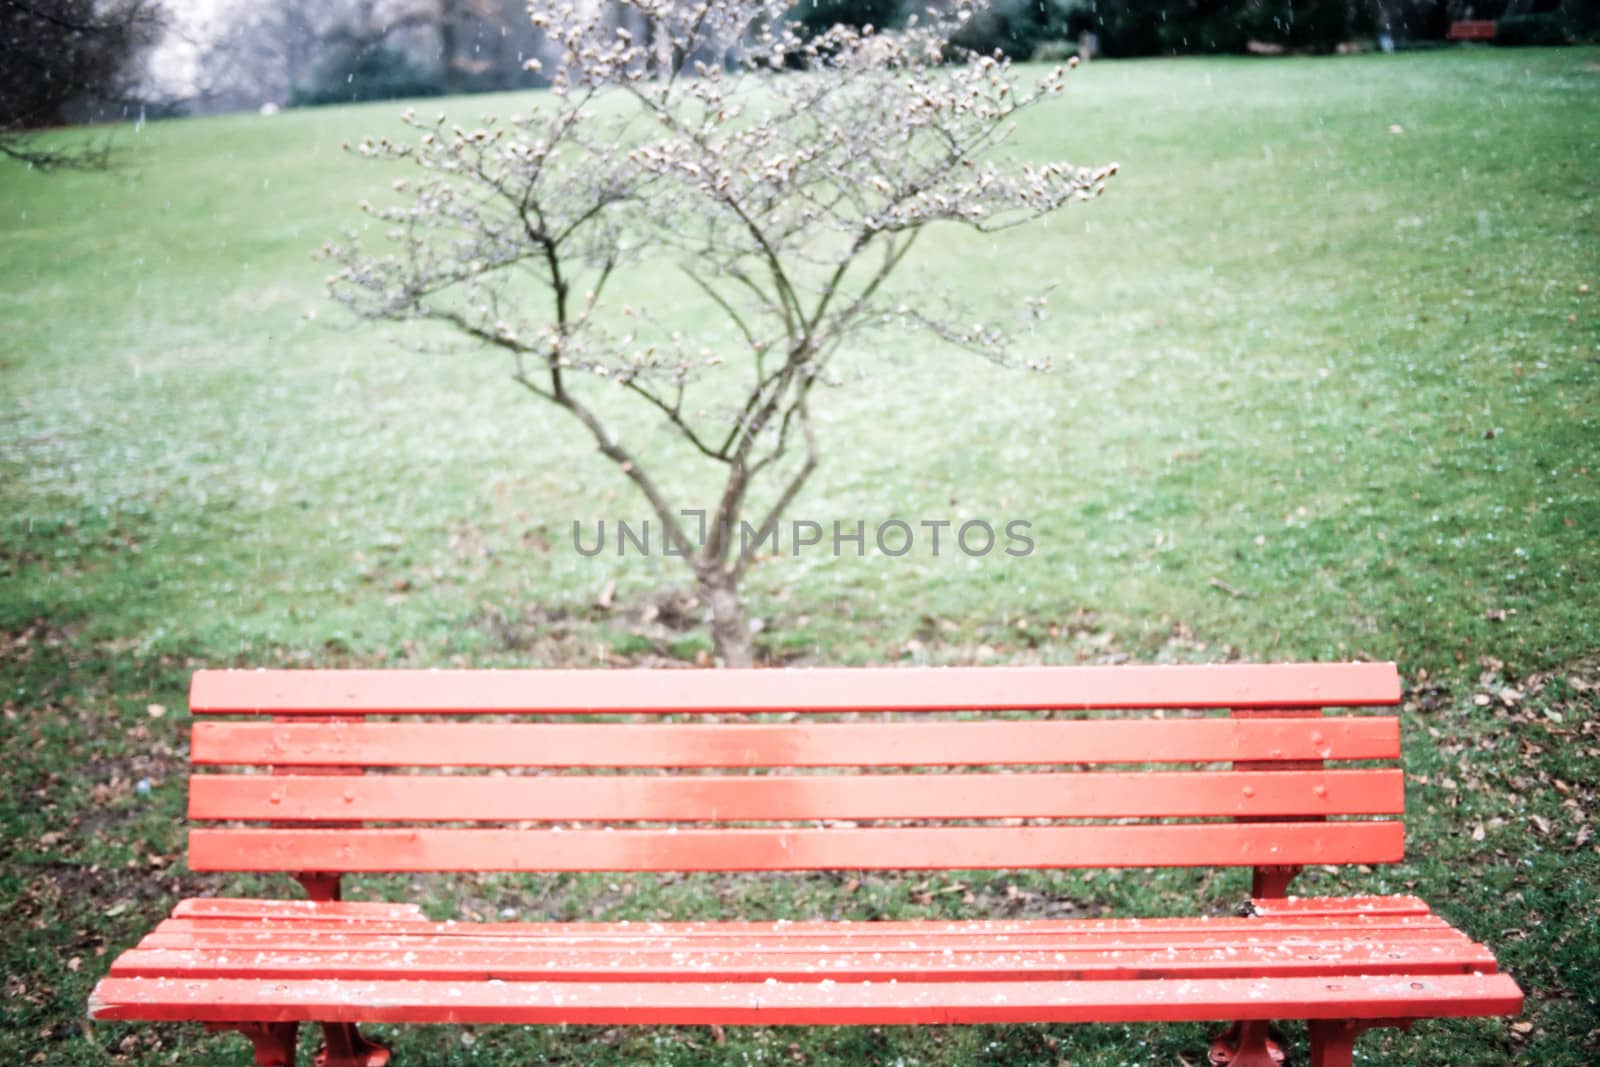 First winter snowflakes on empty wooden red bench in park on green lawn with a small defoliated shrub behind it